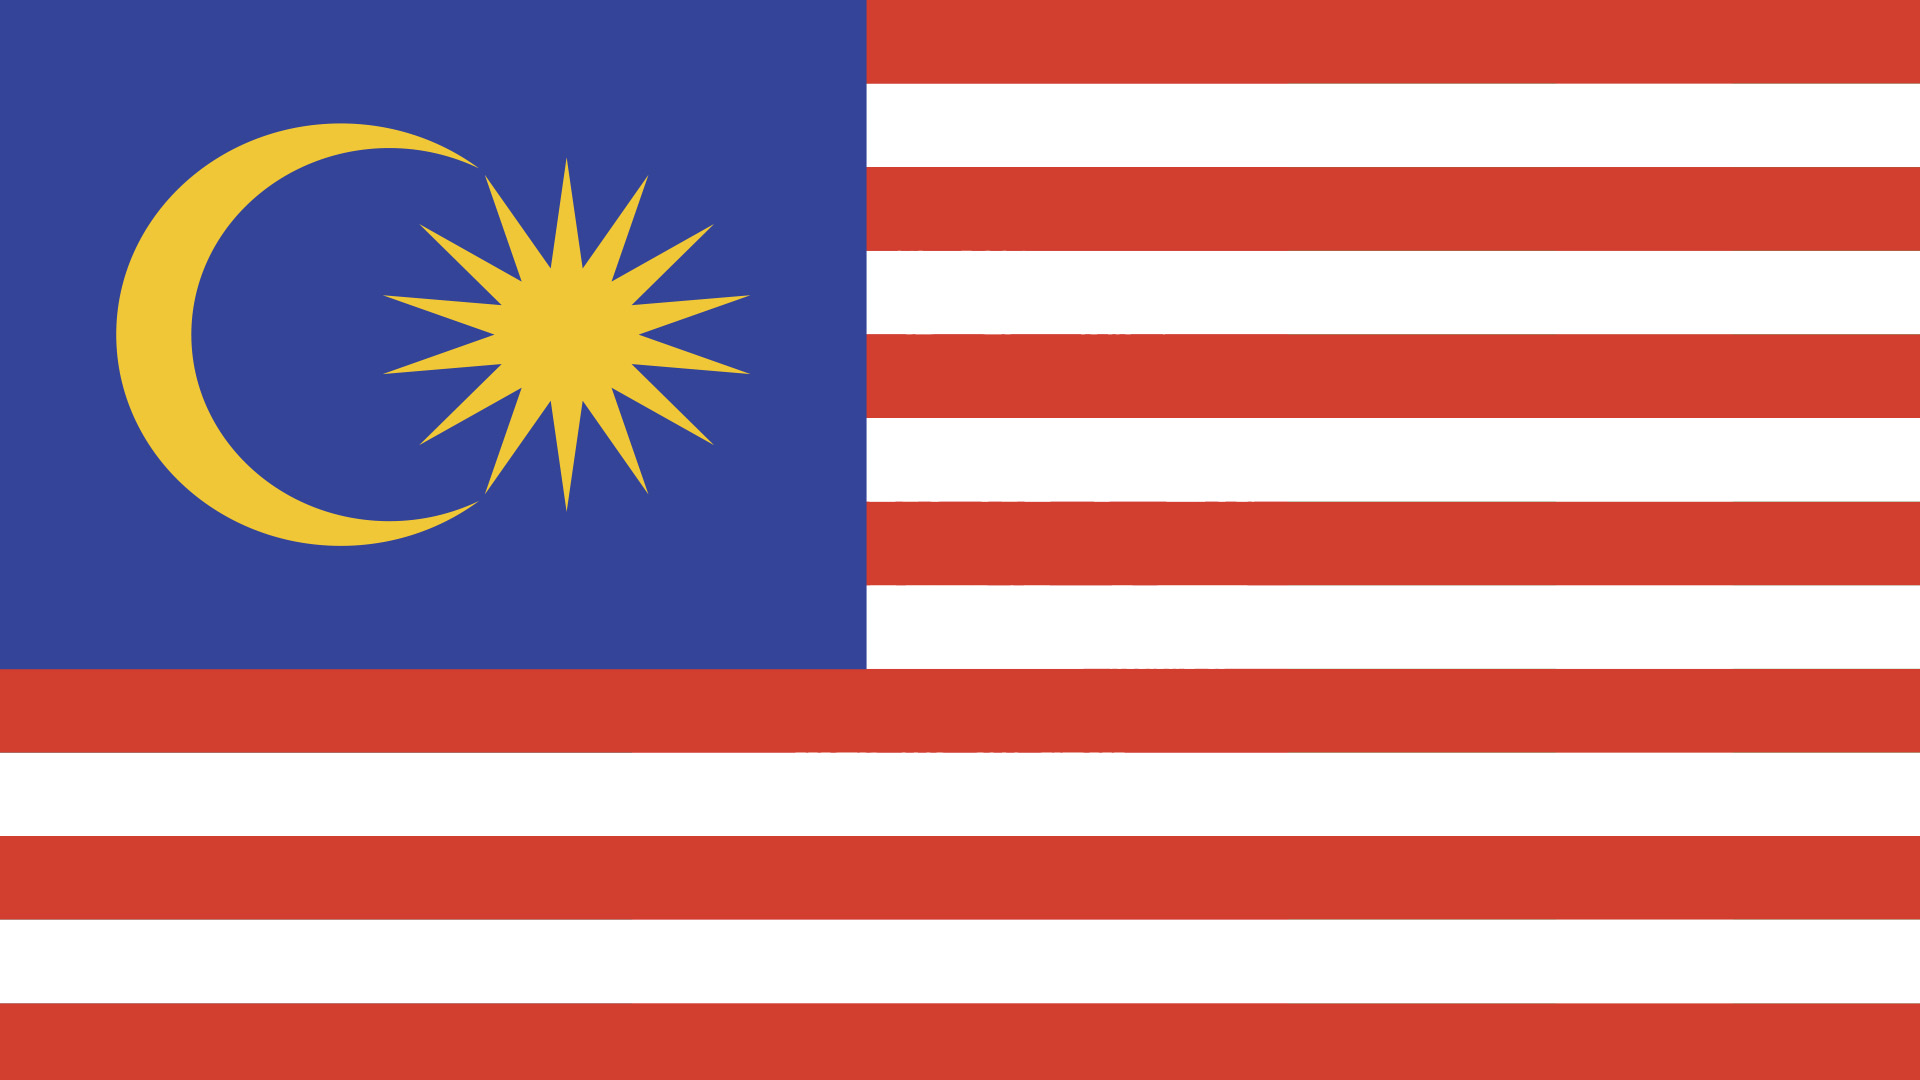 A flag with red and white stripes